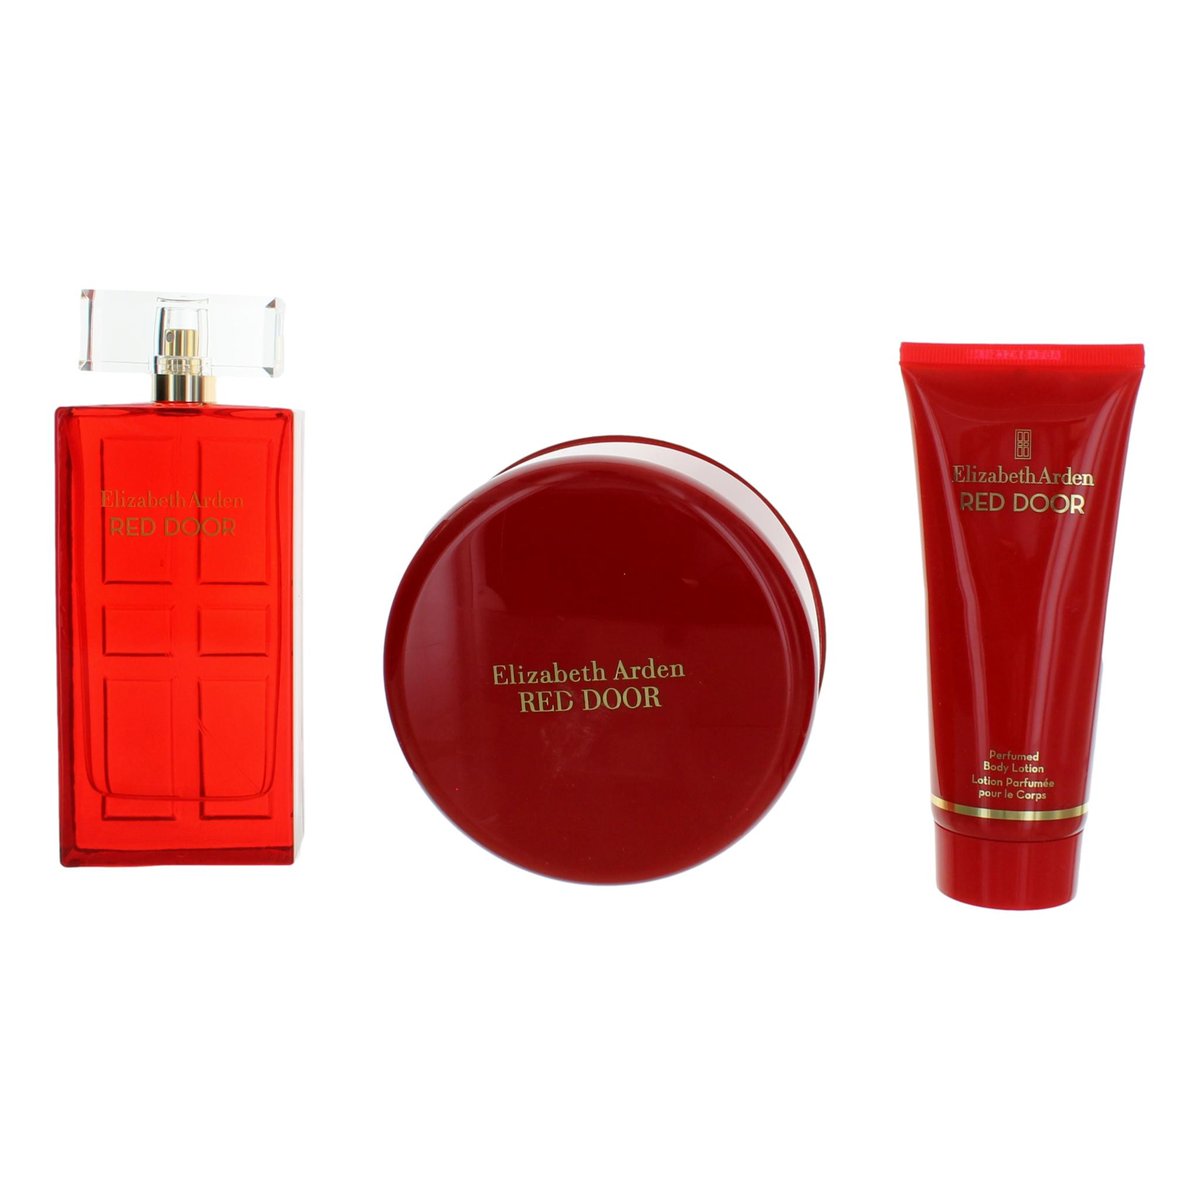 Have you seen our Red Door by Elizabeth Arden, 3 Piece Gift Set for Women with Powder?
Come check it out!
exbeautyco.com/products/view/…

#giftset #giftideas #giftbox #gifts #giftsforher #giftsforhim #birthdaygift #giftsforfriends #perfume #personalizedgifts #giftforher #weddinggift